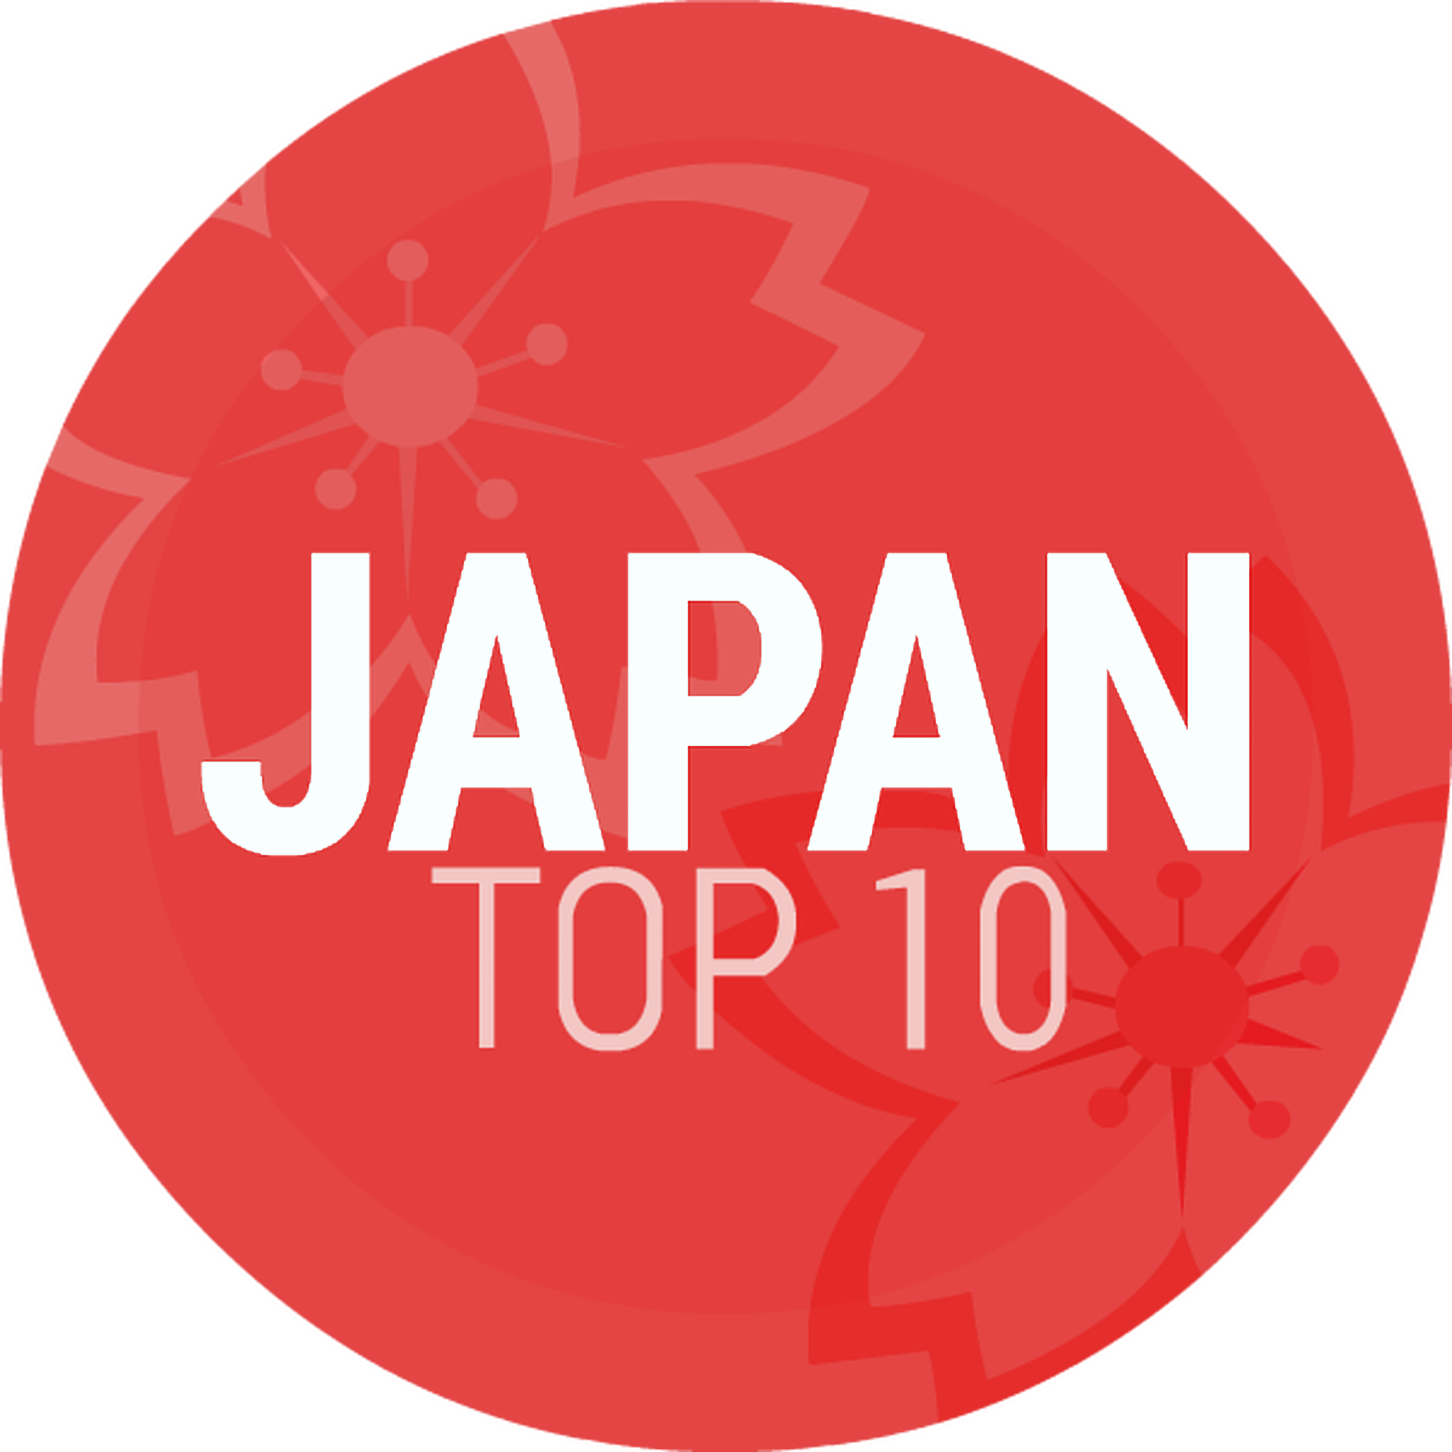 Episode 179: Japan Top 10 Mid/Late April 2017 Countdown